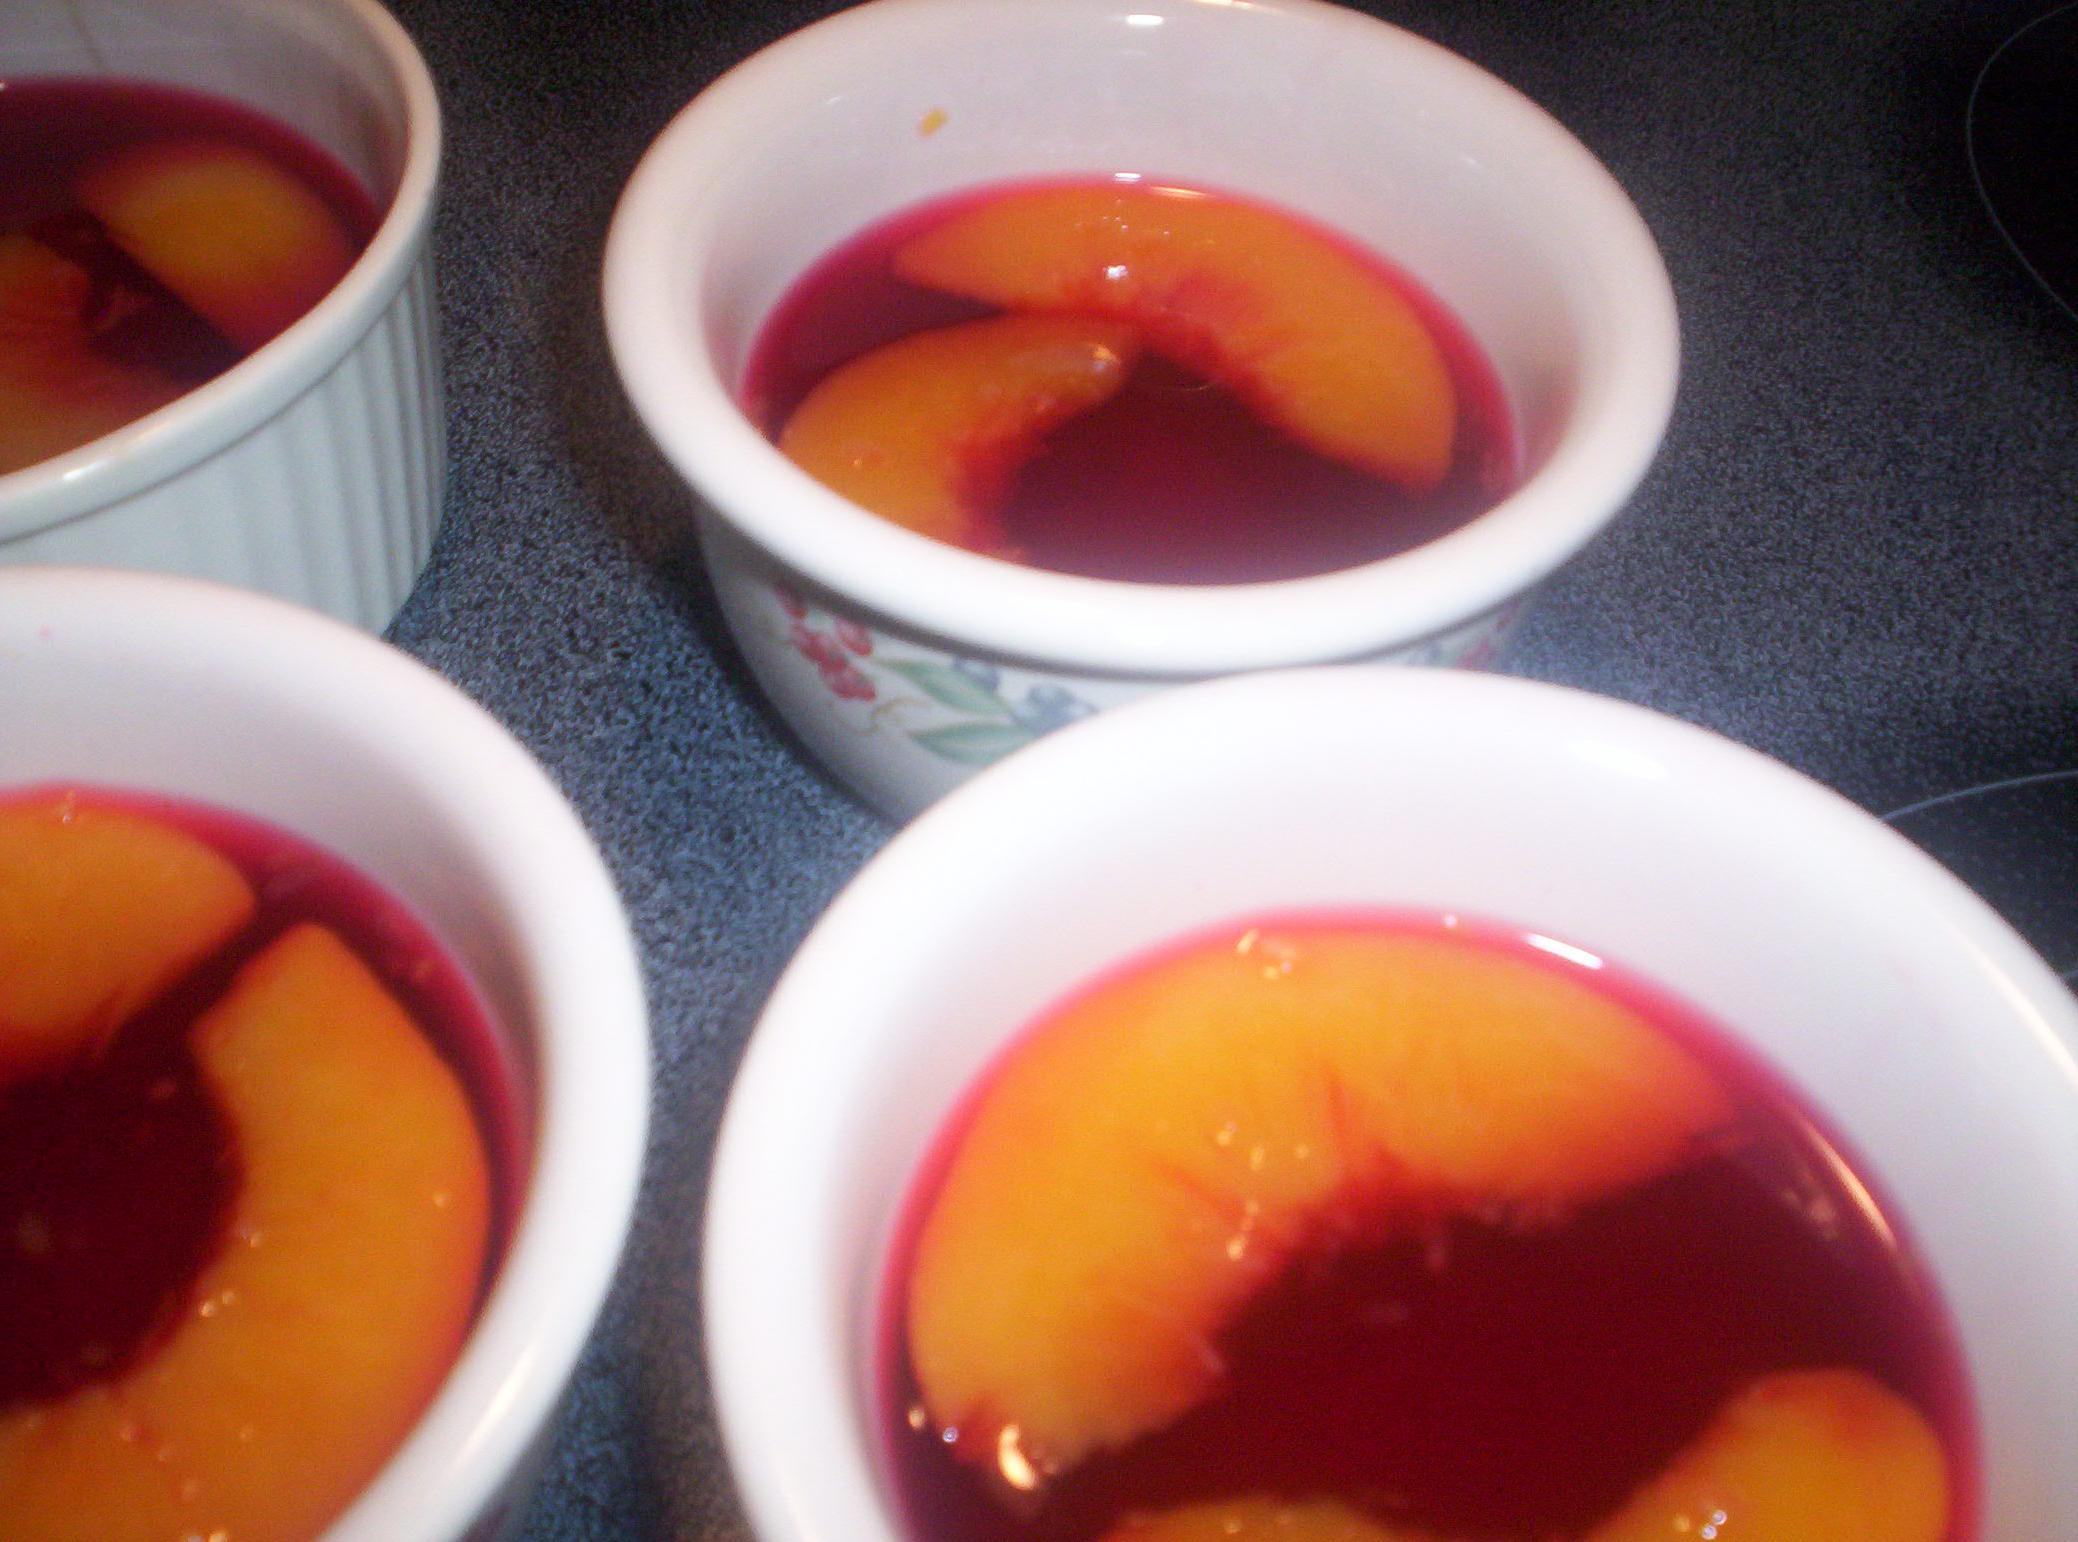 ) “Amaze Your Guests with This Jello Surprise Recipe